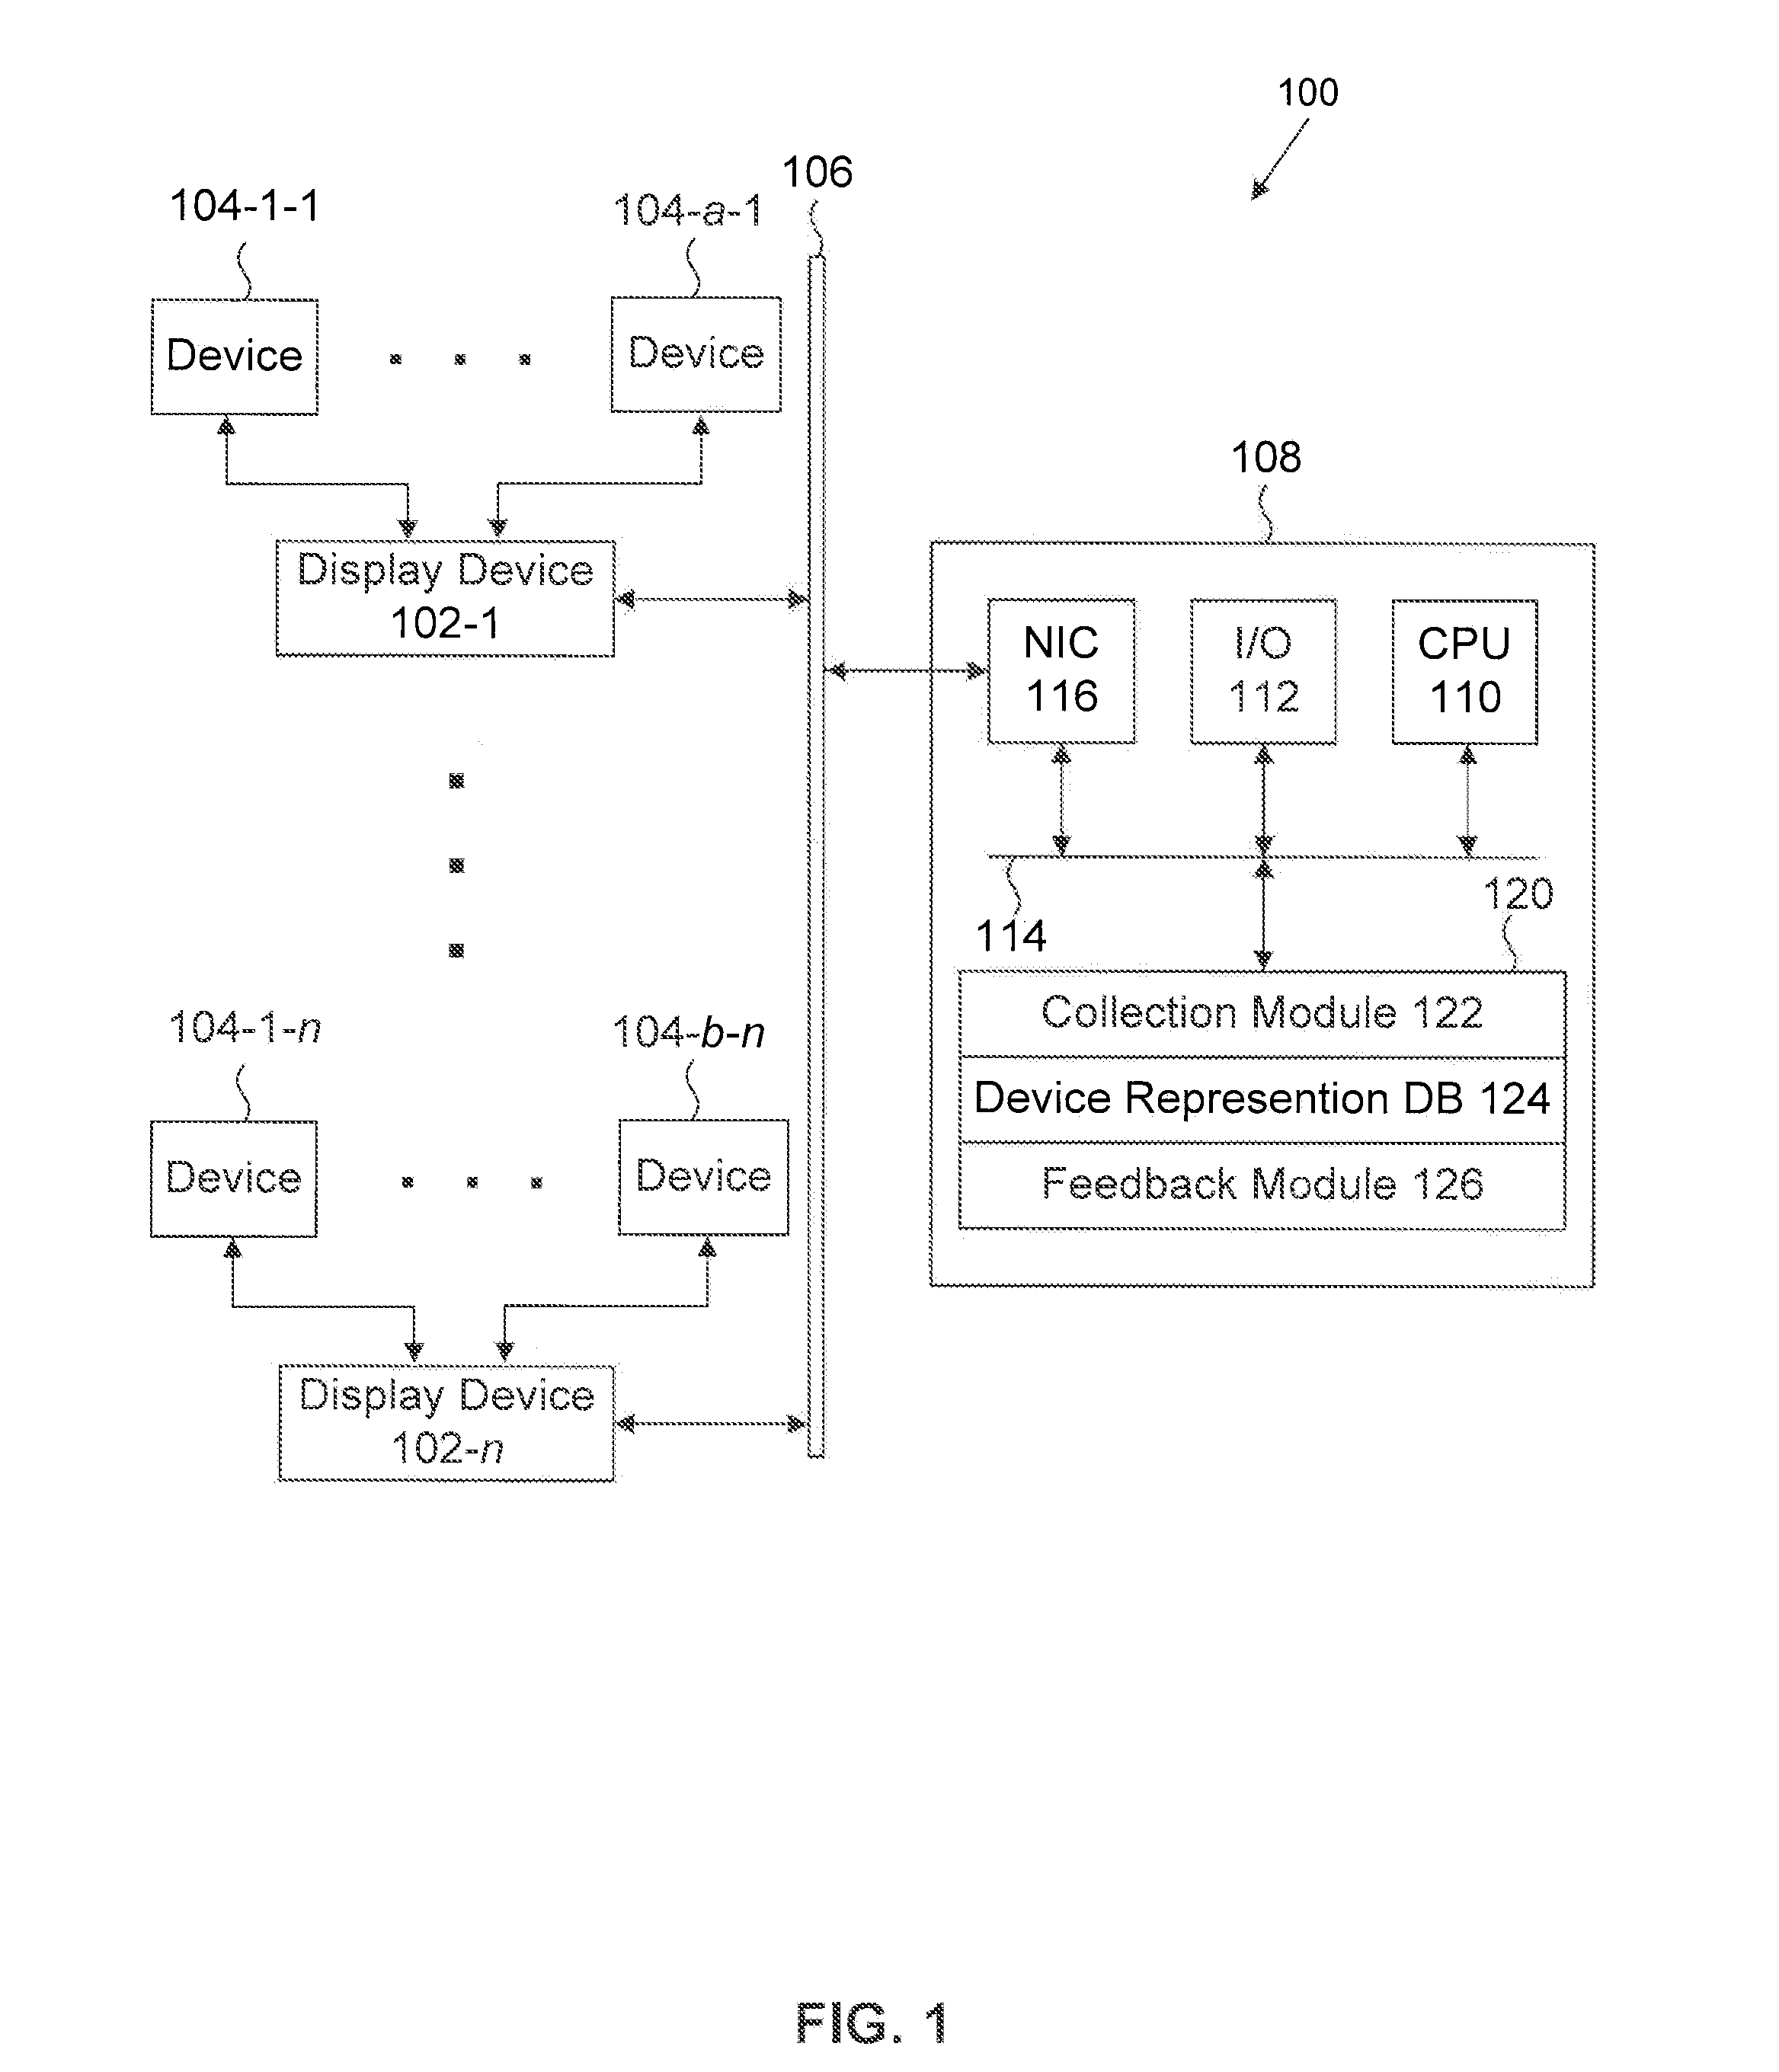 Providing A Representation For A Device Connected To A Display Device